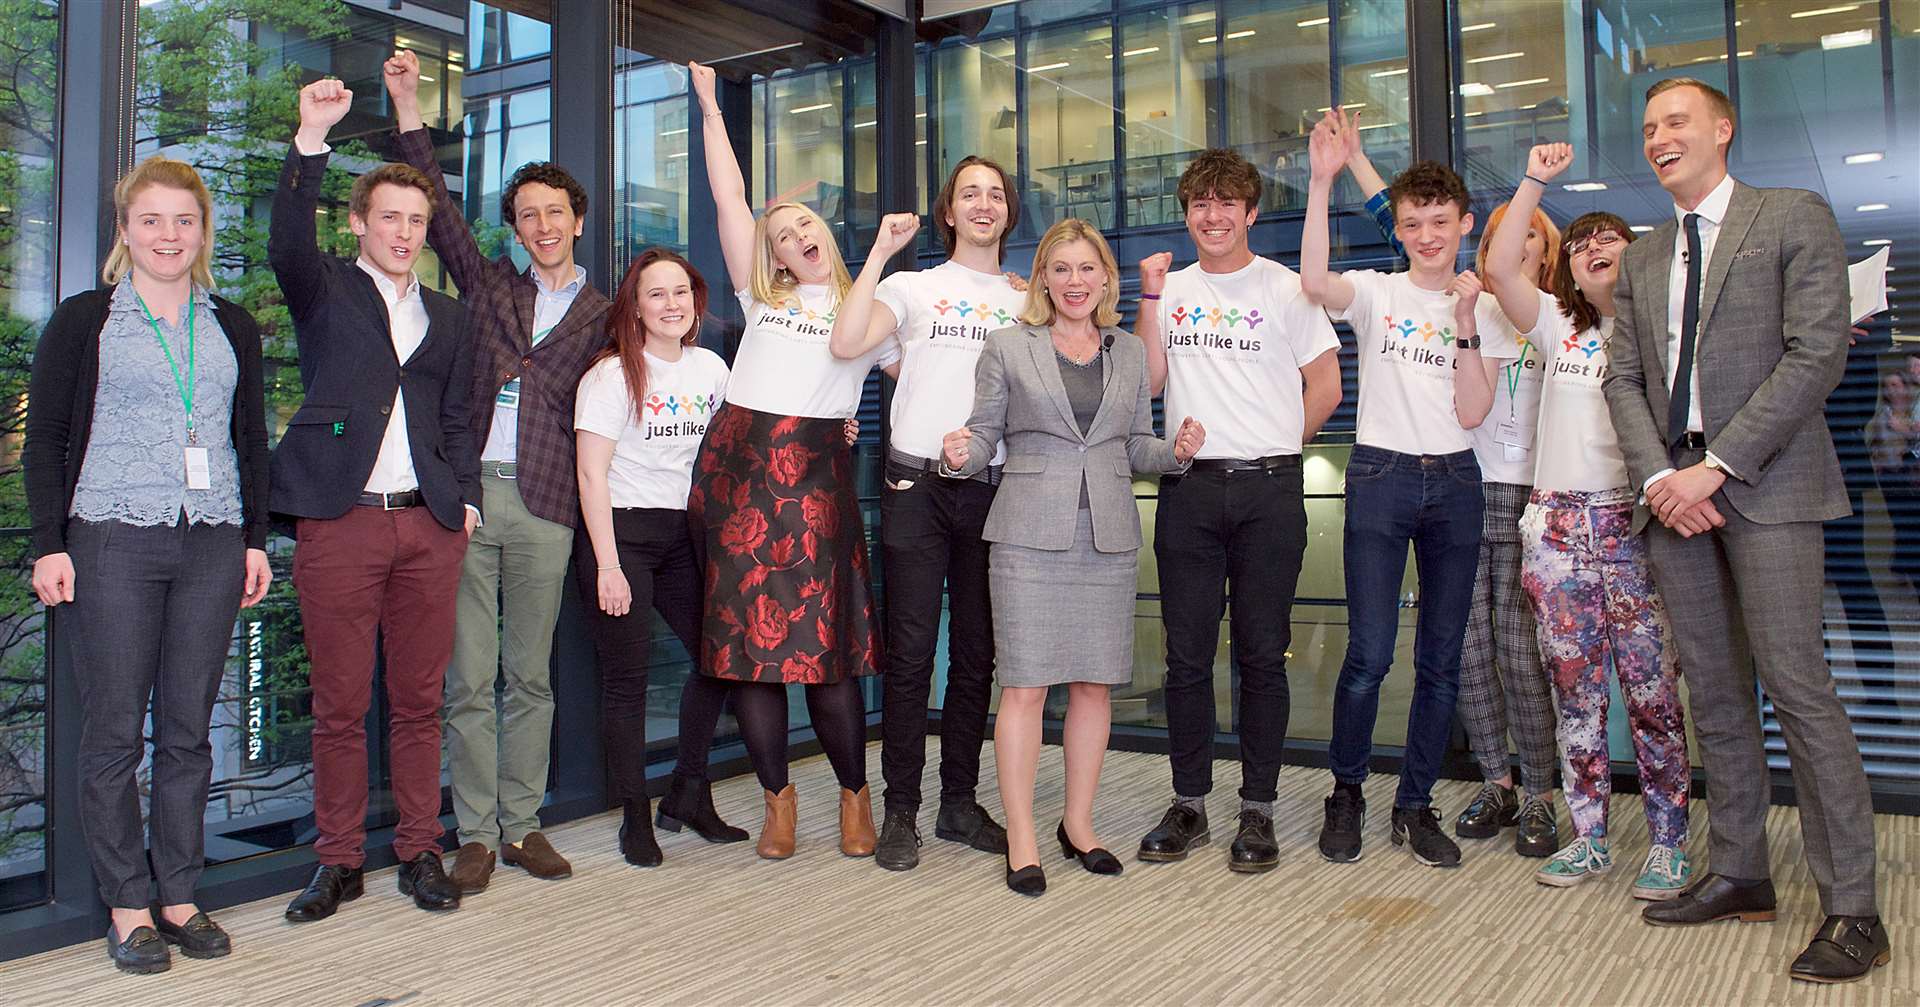 Just Like Us members meet with former education secretary Justine Greening - the charity which supports LGBT members of the community is setting up a new project to support people in Thanet (6816348)